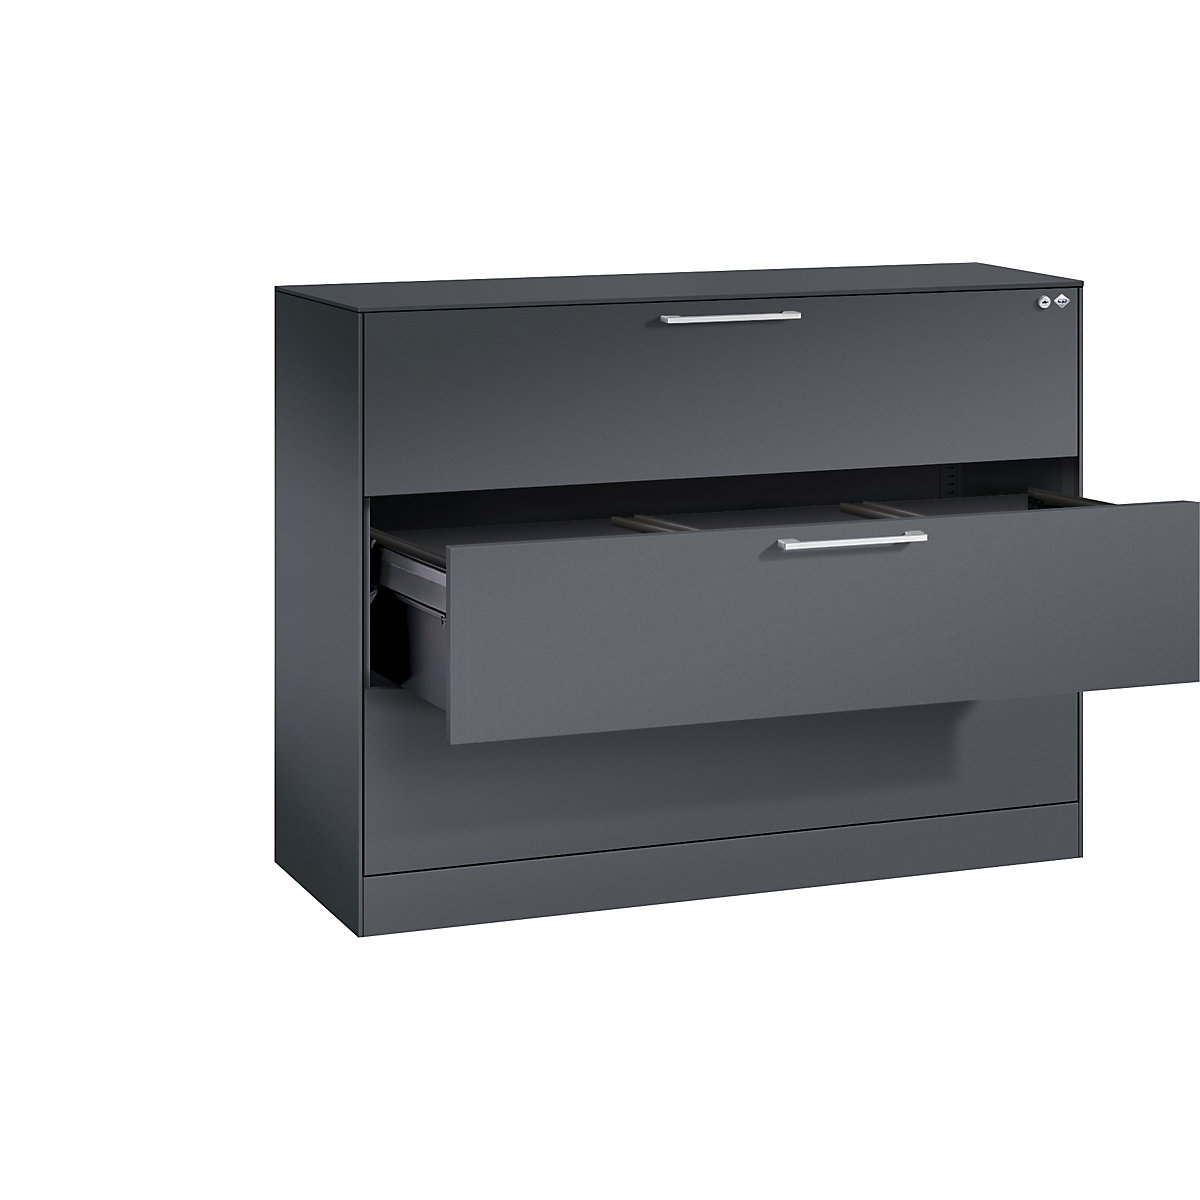 ASISTO suspension filing cabinet – C+P, width 1200 mm, with 3 drawers, black grey/black grey-11